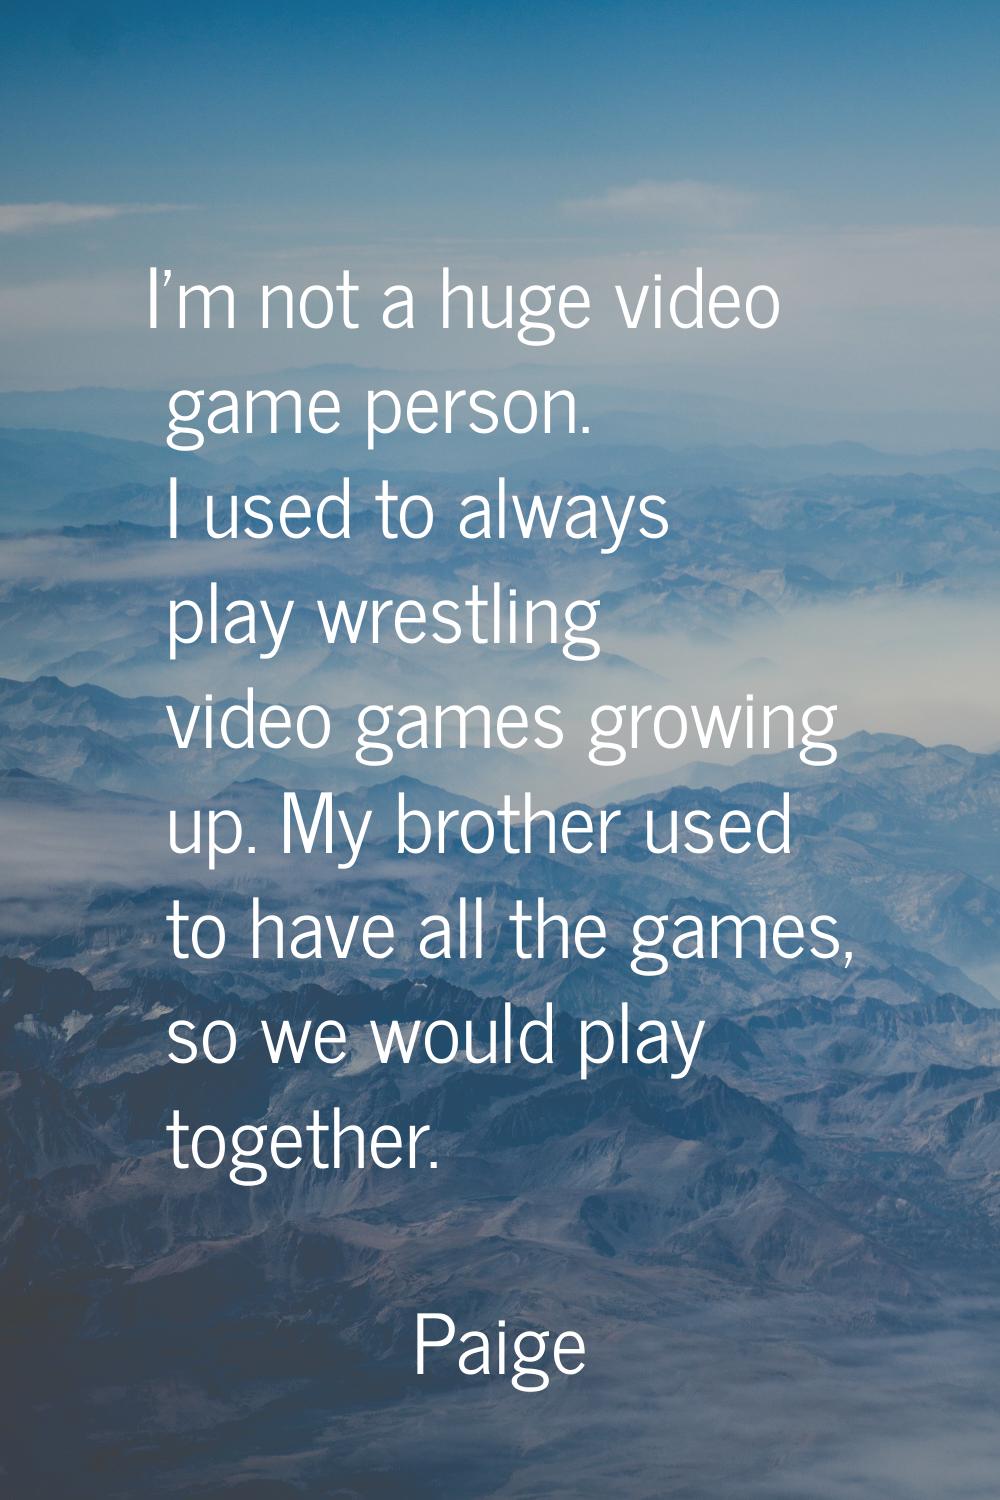 I'm not a huge video game person. I used to always play wrestling video games growing up. My brothe